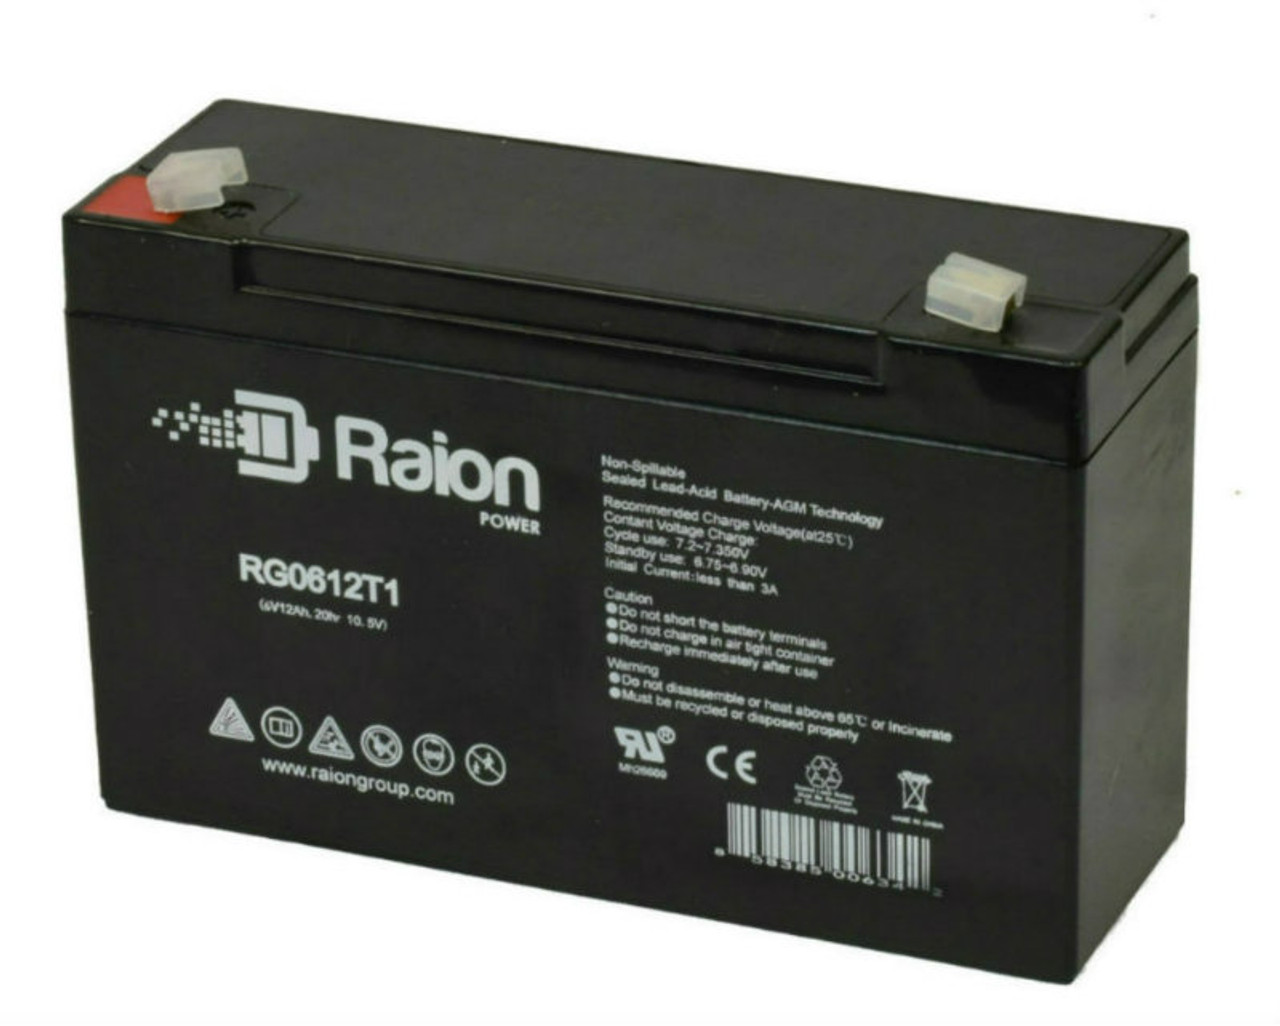 Raion Power RG06120T1 Replacement 6V 12Ah Emergency Light Battery for Power Rite PRB610